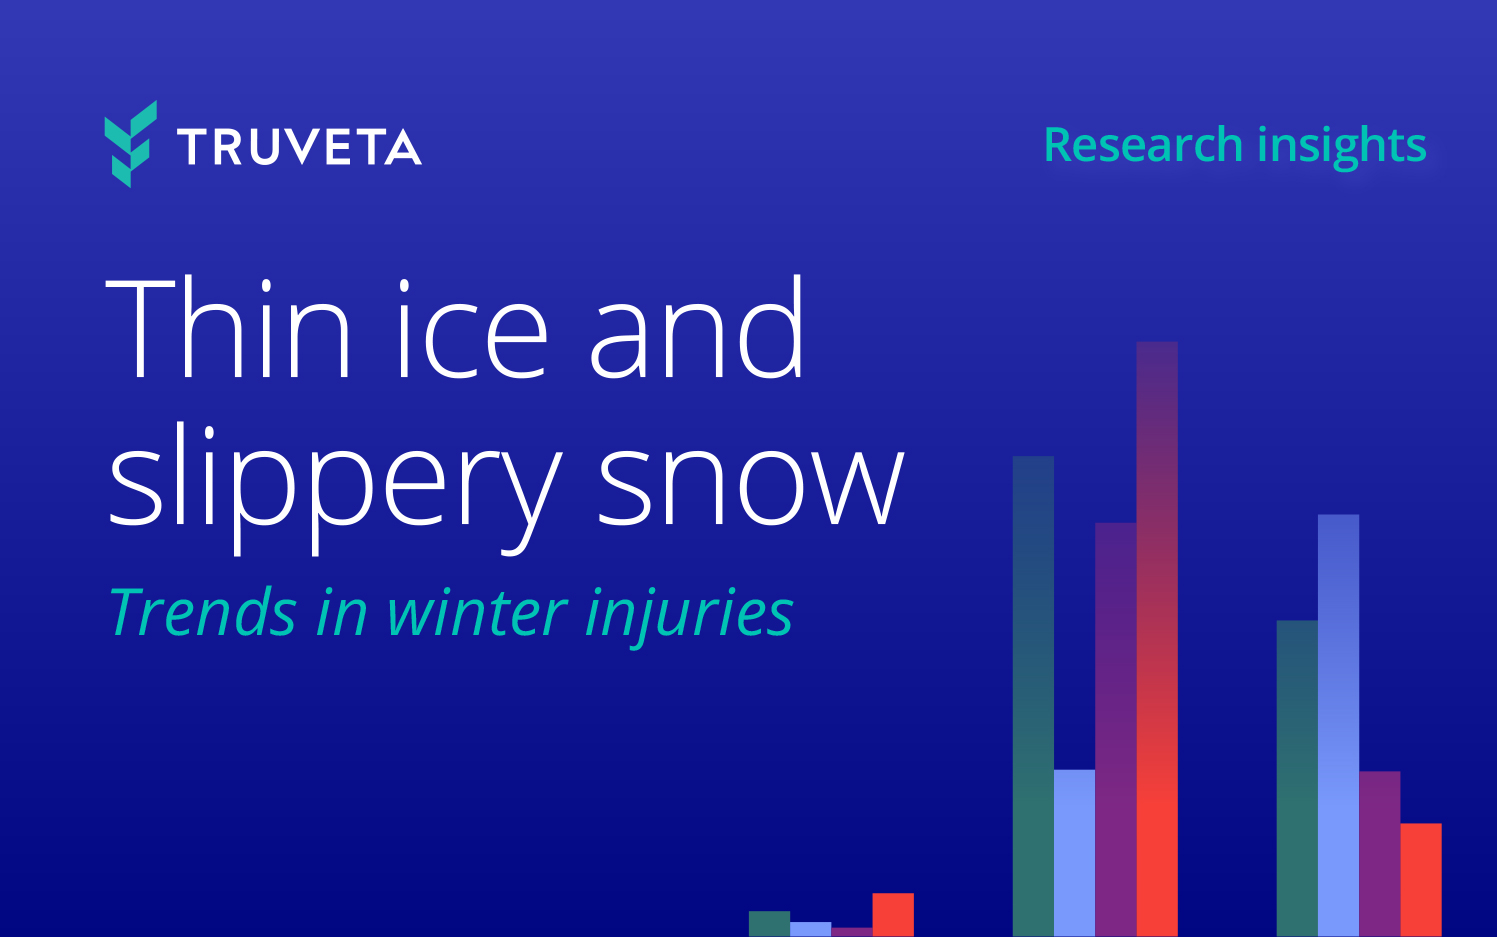 Using EHR data, Truveta Research explores snow or ice-related injuries by region in the US